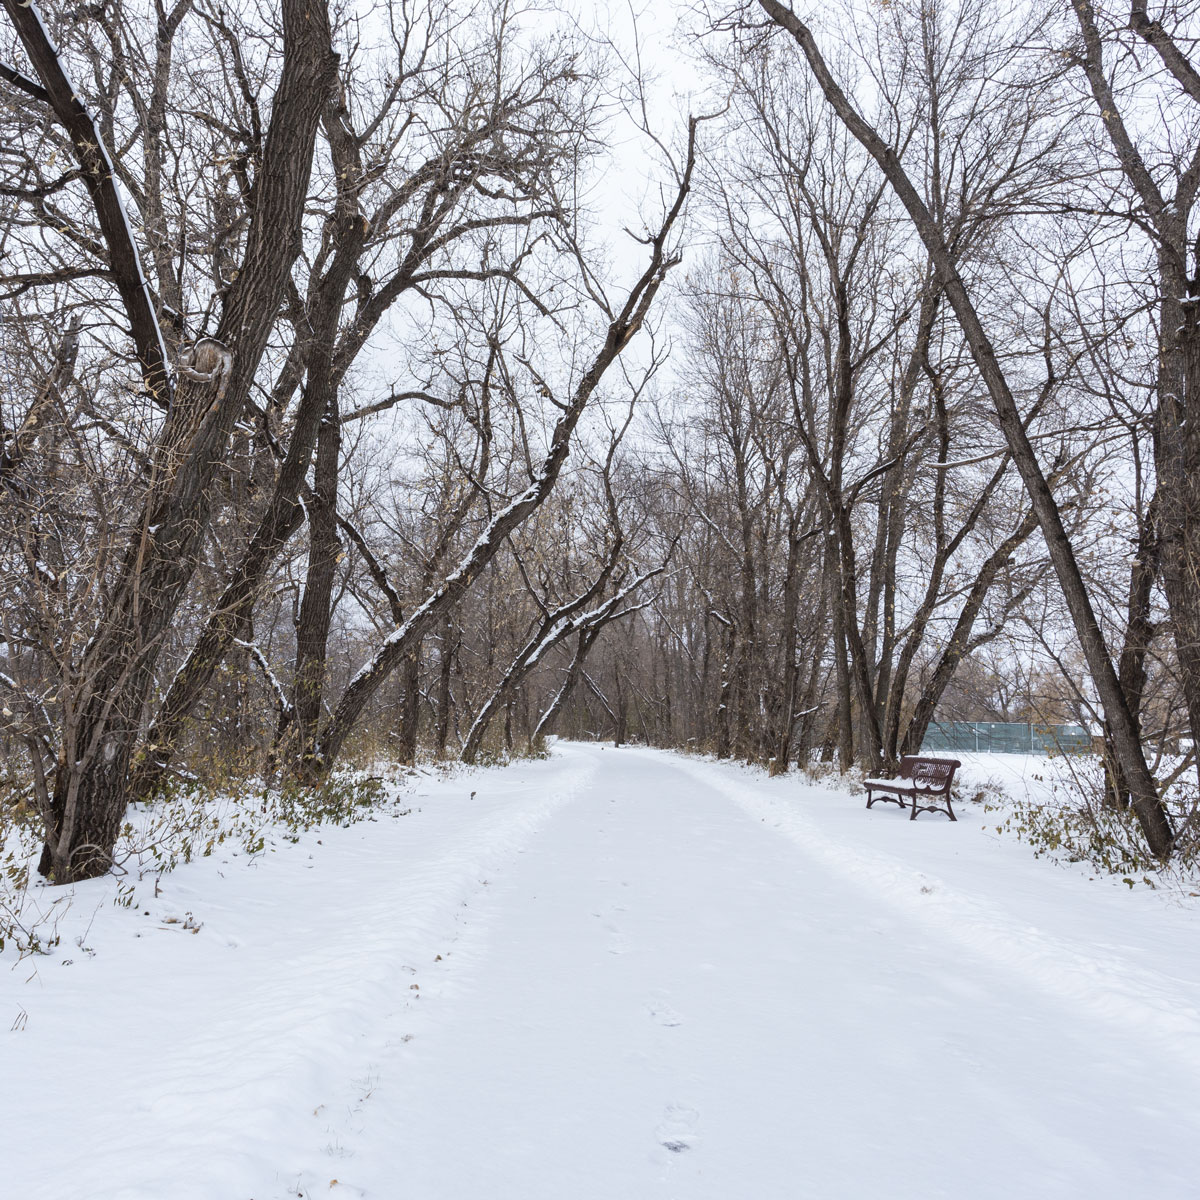 A snow covered hiking trail surrounded by trees in a Bismarck, North Dakota park.